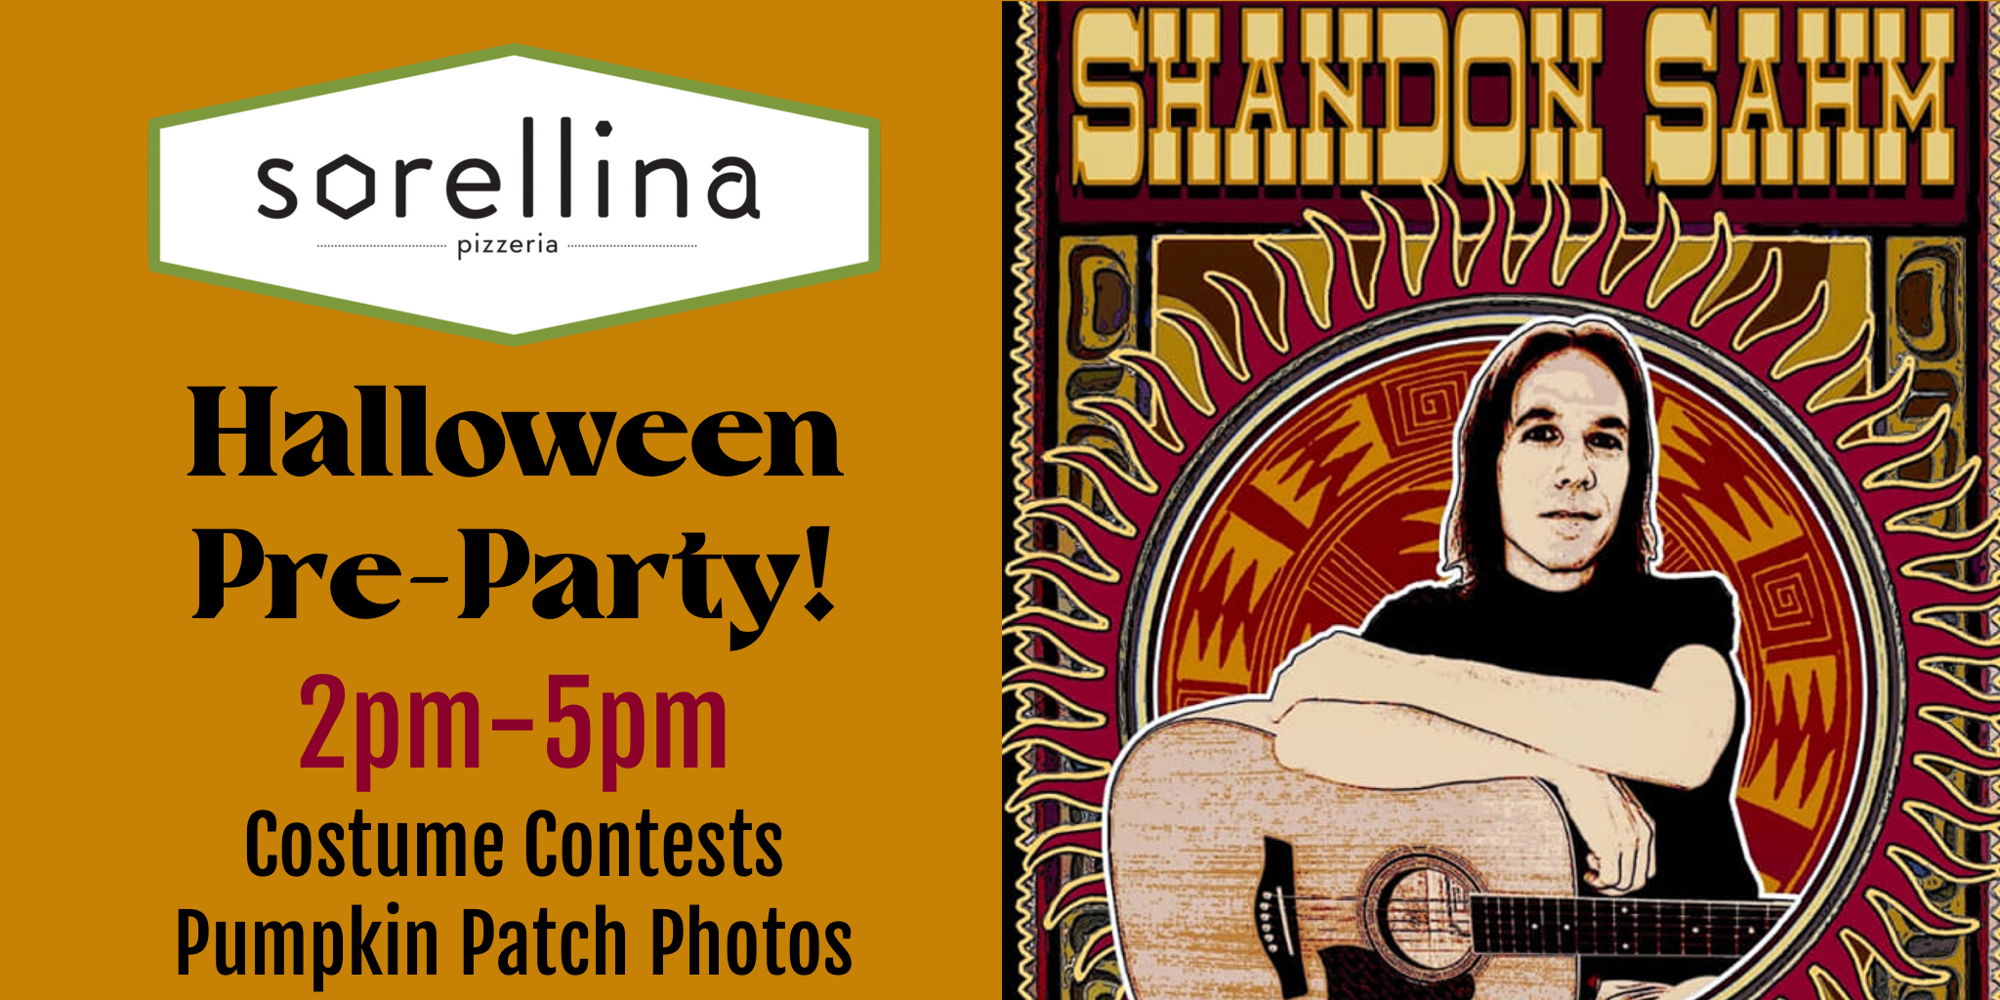 Halloween Pre-Party with Shandon Sahm promotional image